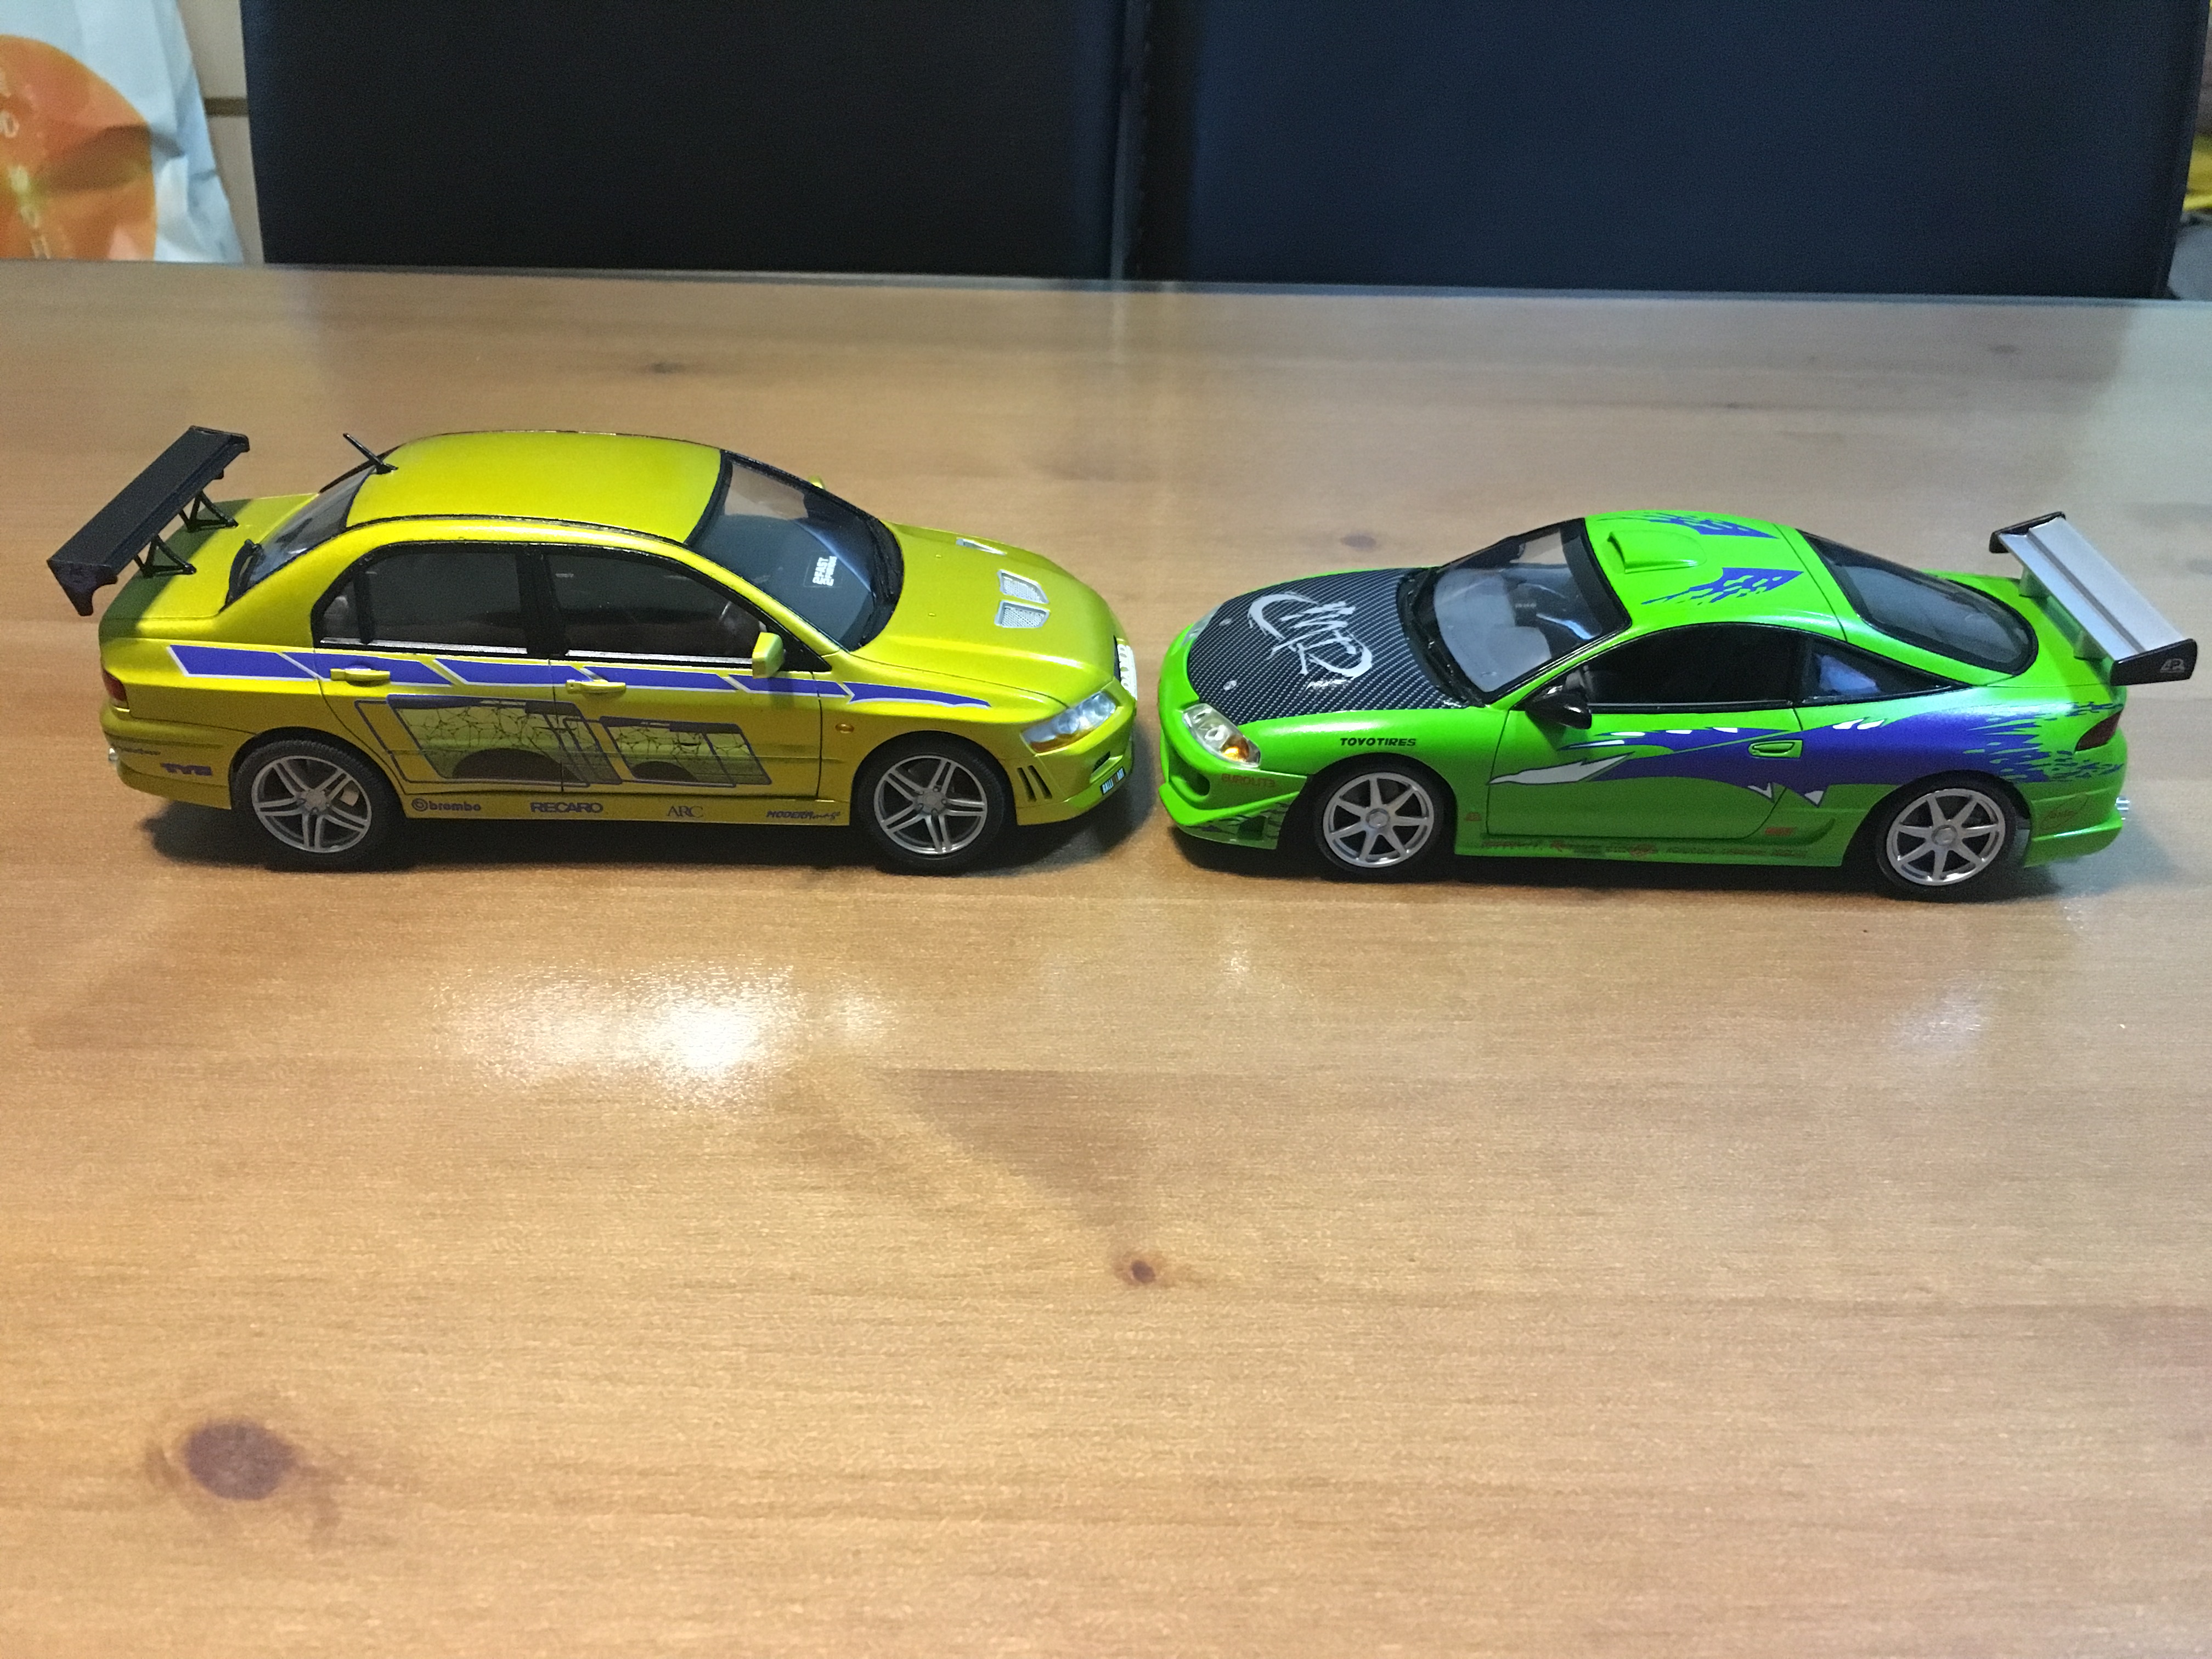 1/25 Eclipse (The Fast and the Furious Version) Revell - Model Cars - Model  Cars Magazine Forum